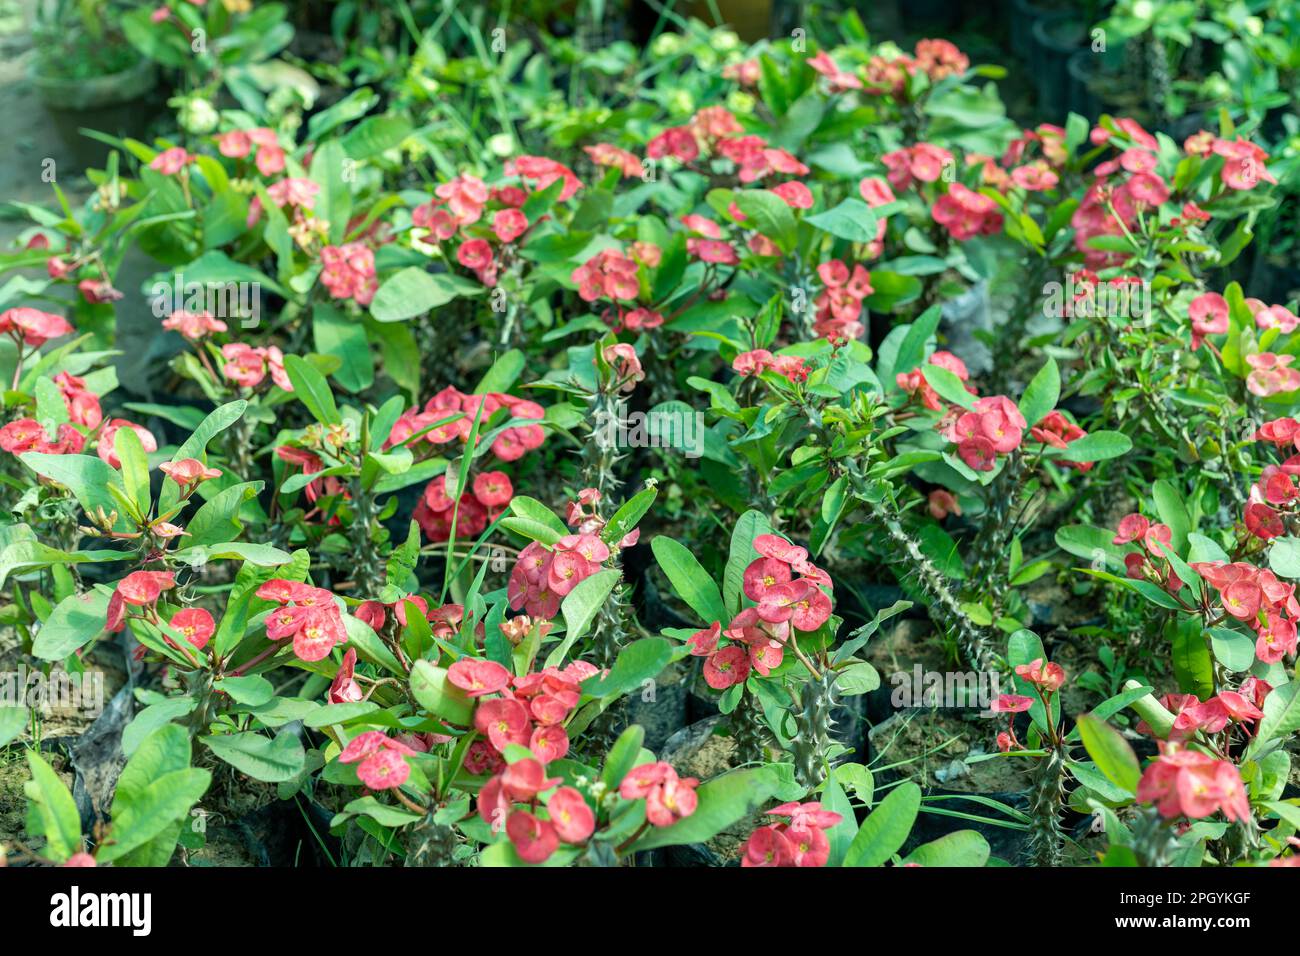 Red crown of thorns plant blooming in spring season Stock Photo